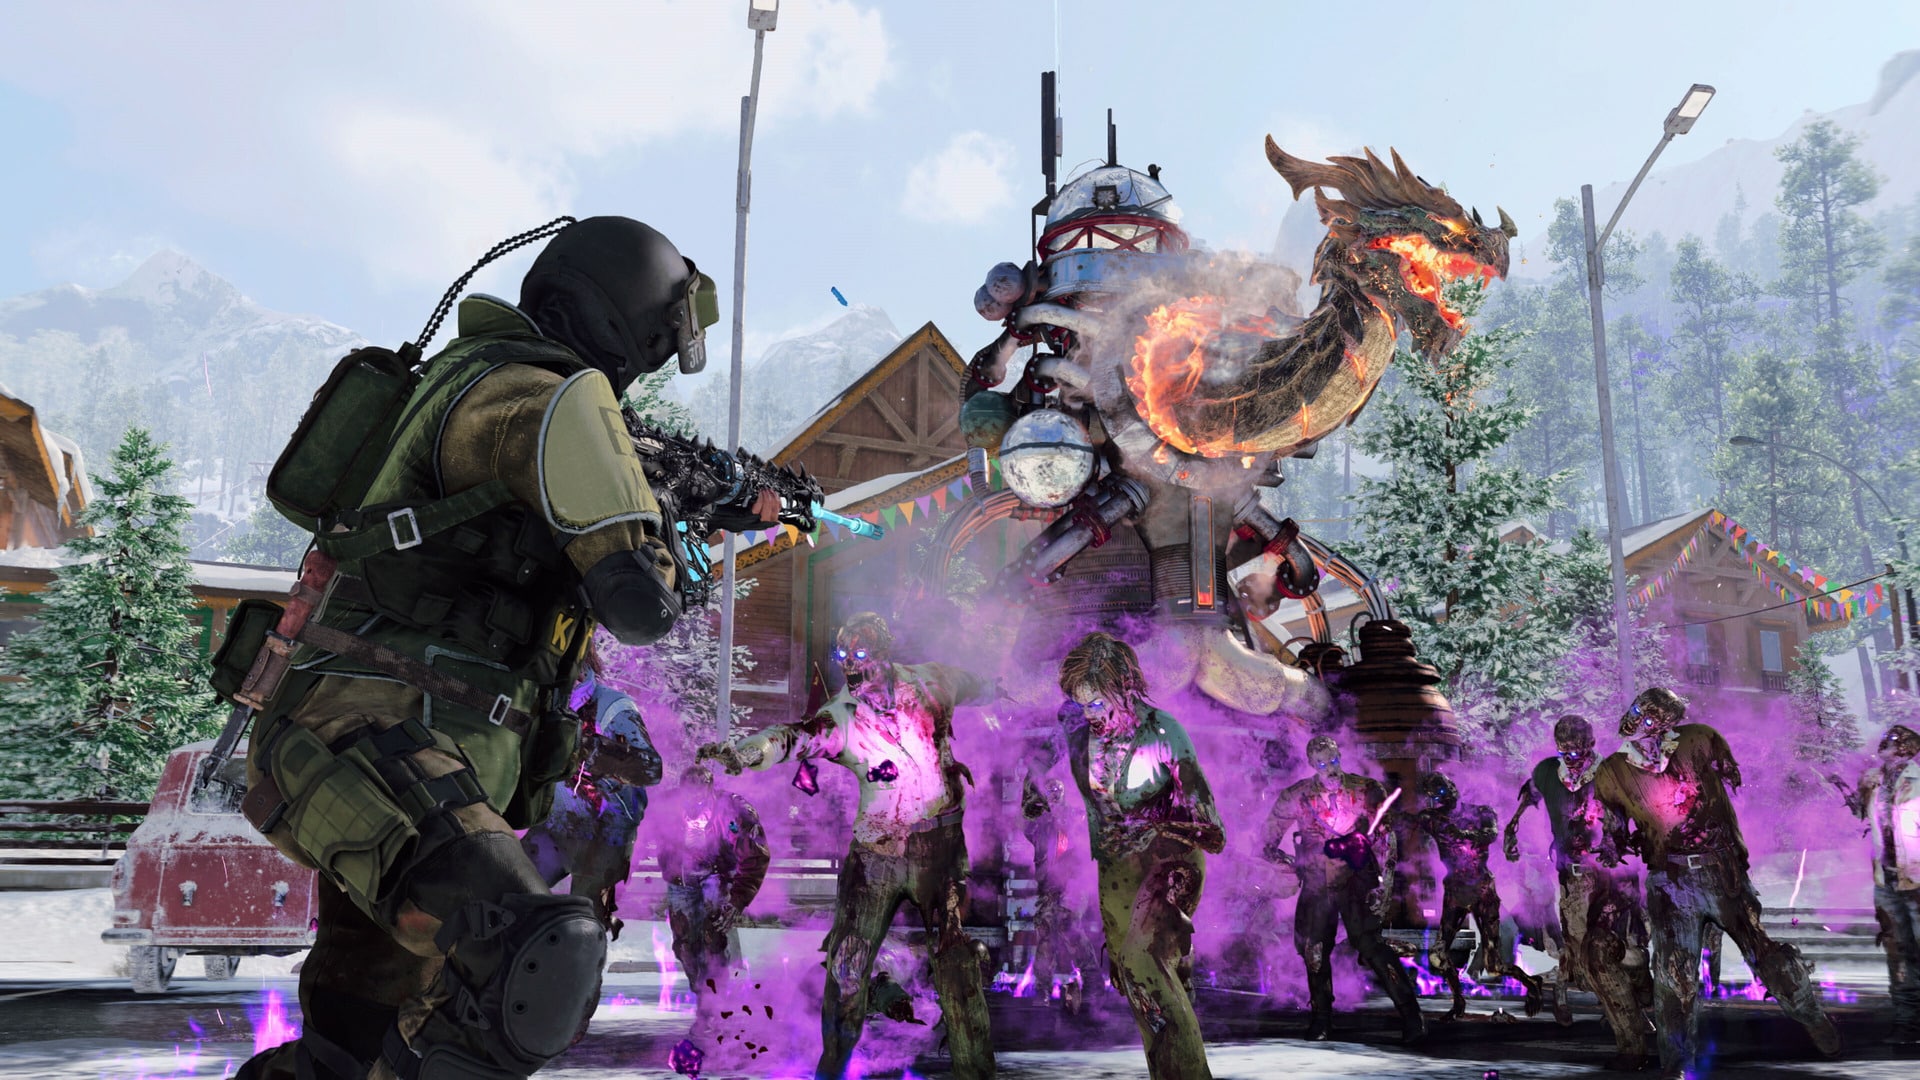 Call of Duty Details MW3 Beta, Zombies Mode, and Warzone